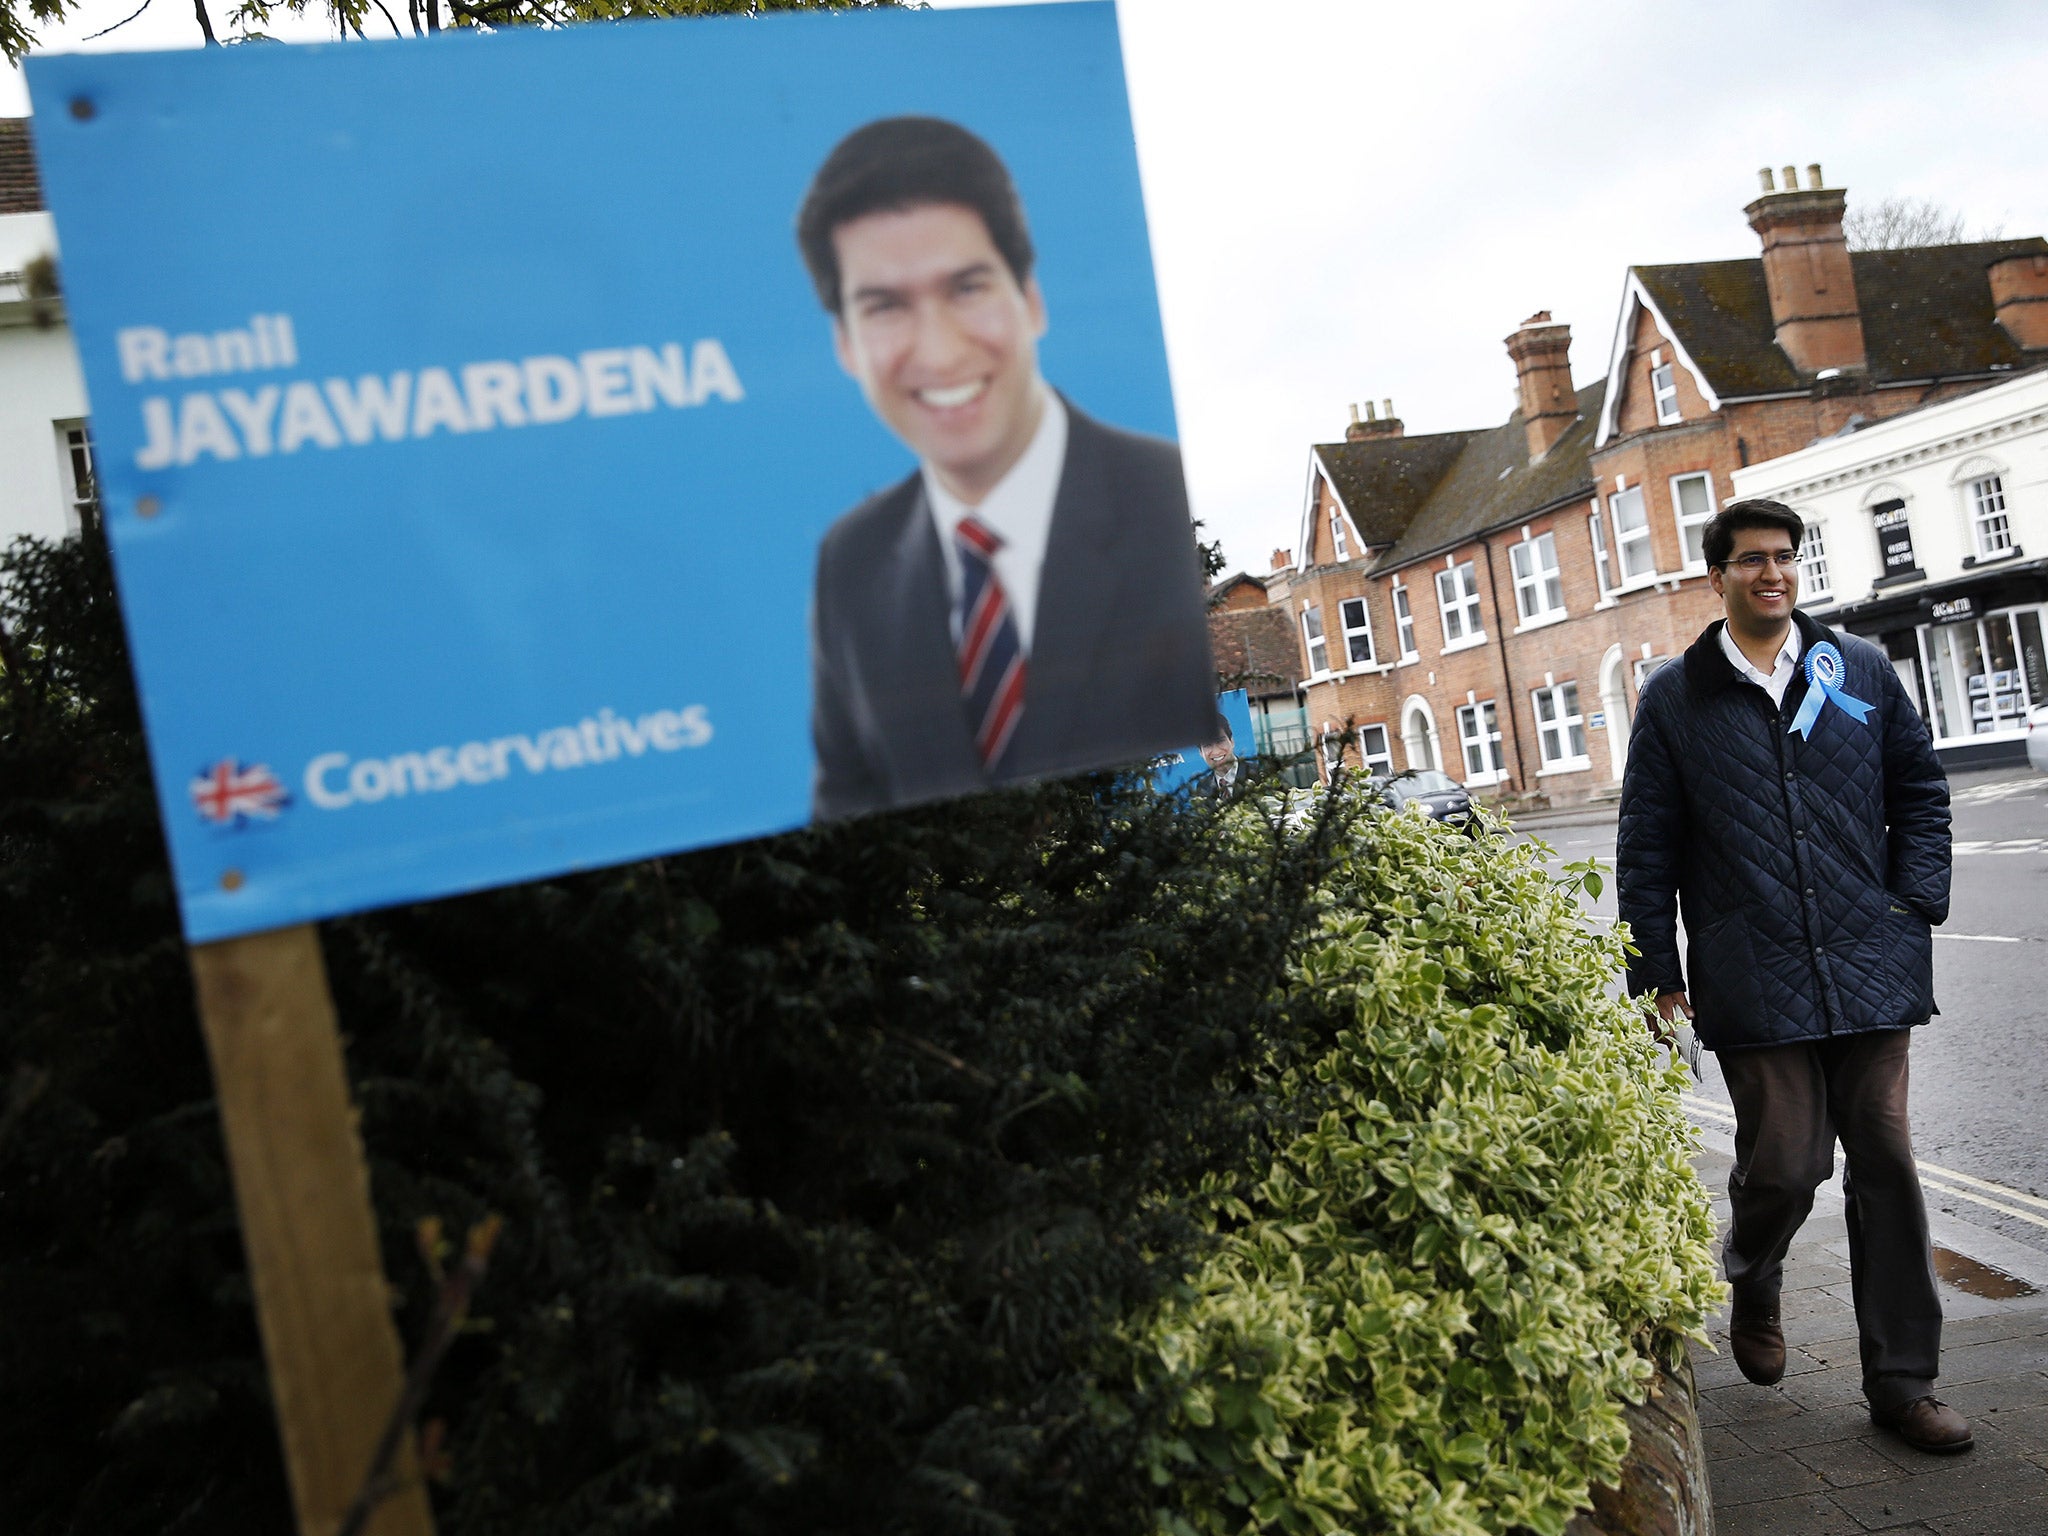 Ranil Jayawardena, the Conservative party candidate for Northeast Hampshire (Getty)